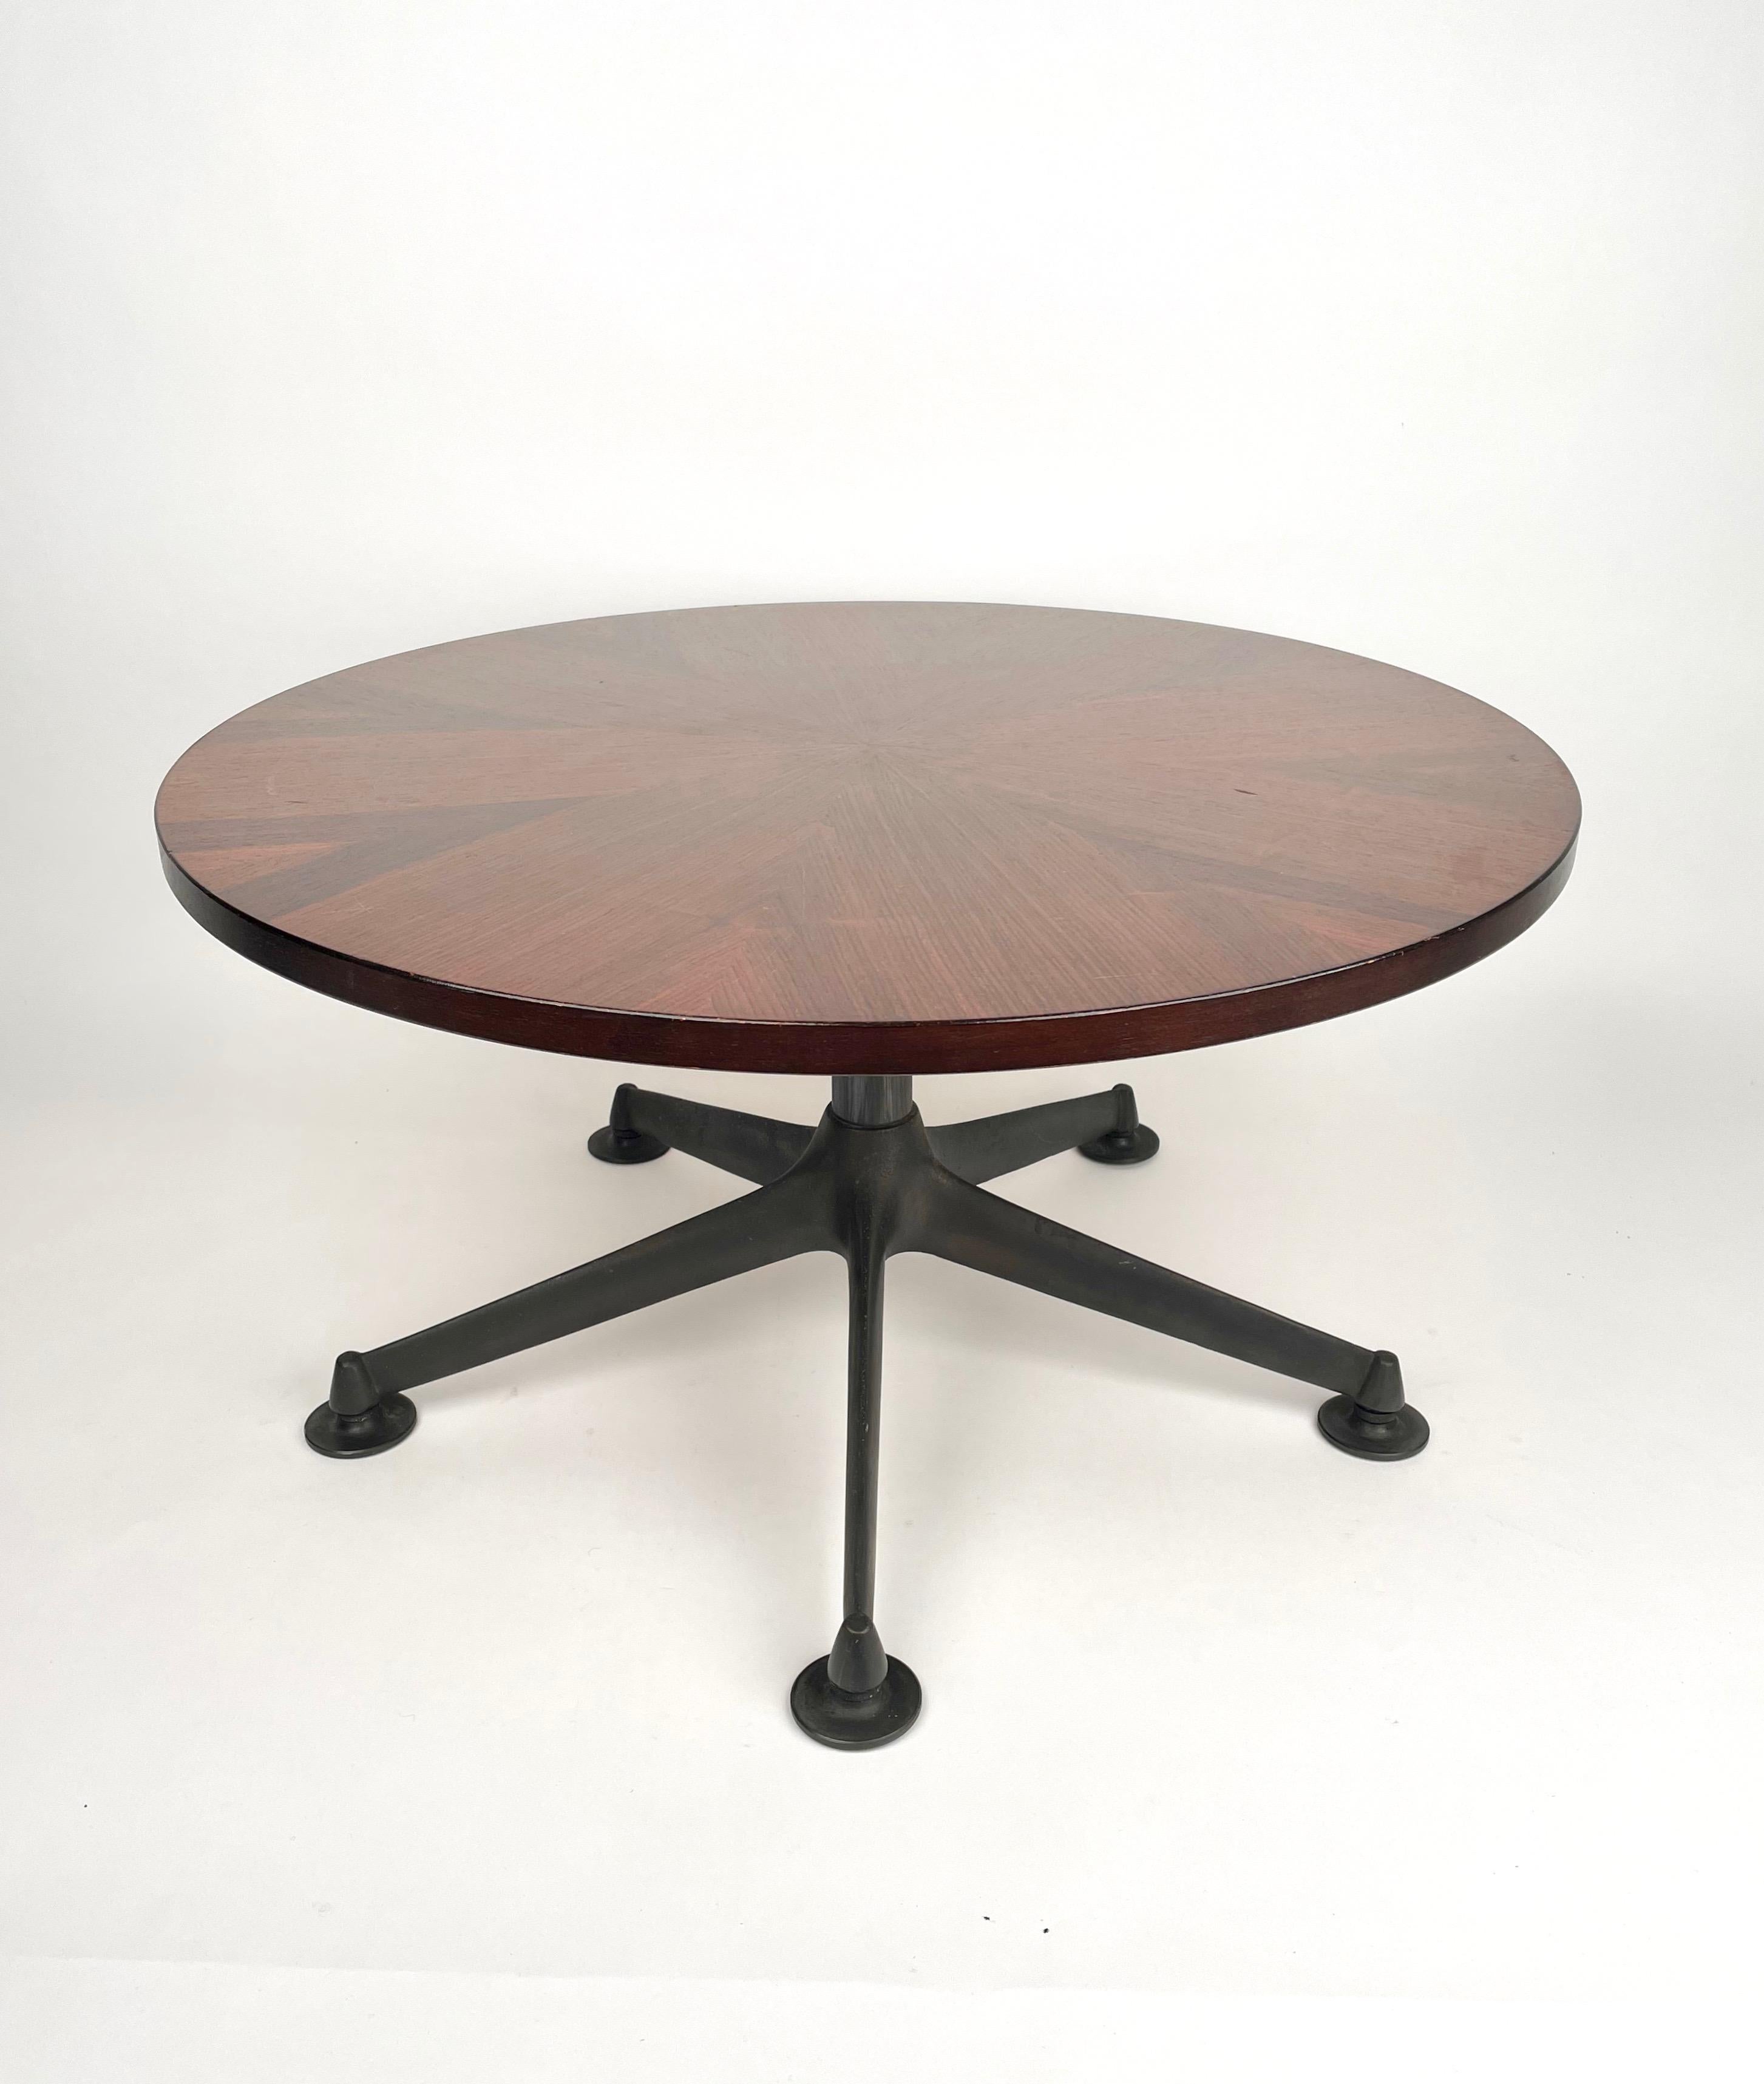 Midcentury round dining table in Metal and wood by Ico Parisi for MIM Roma. 

The tabletop rests on a center pillar in aluminium with five feet. 

Made in Italy 1960s.